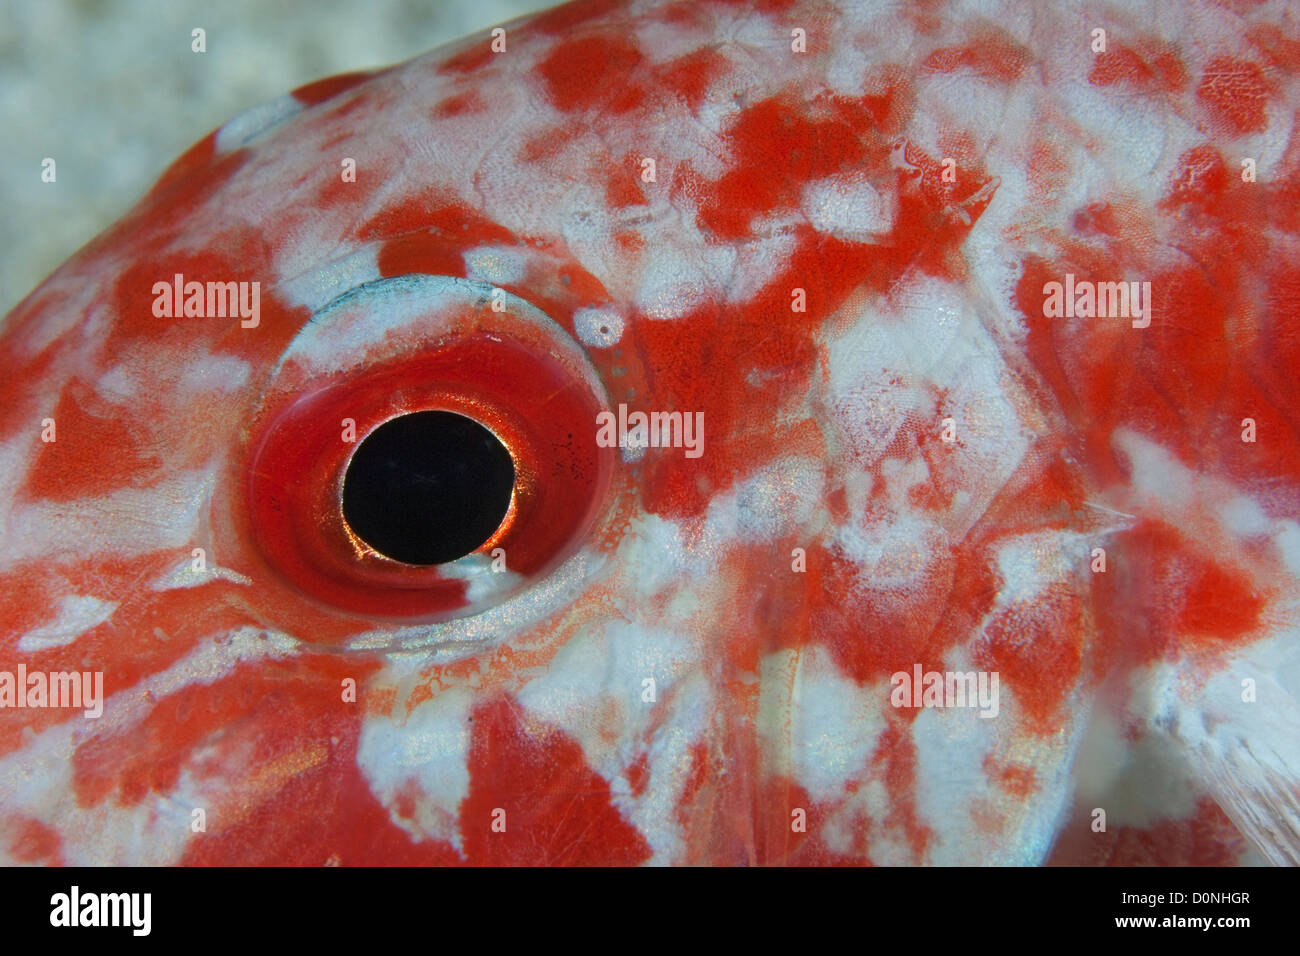 The detail of an eye on a dash-and-dot goatfish (Parupeneus barberinus), in the Maldives. Stock Photo